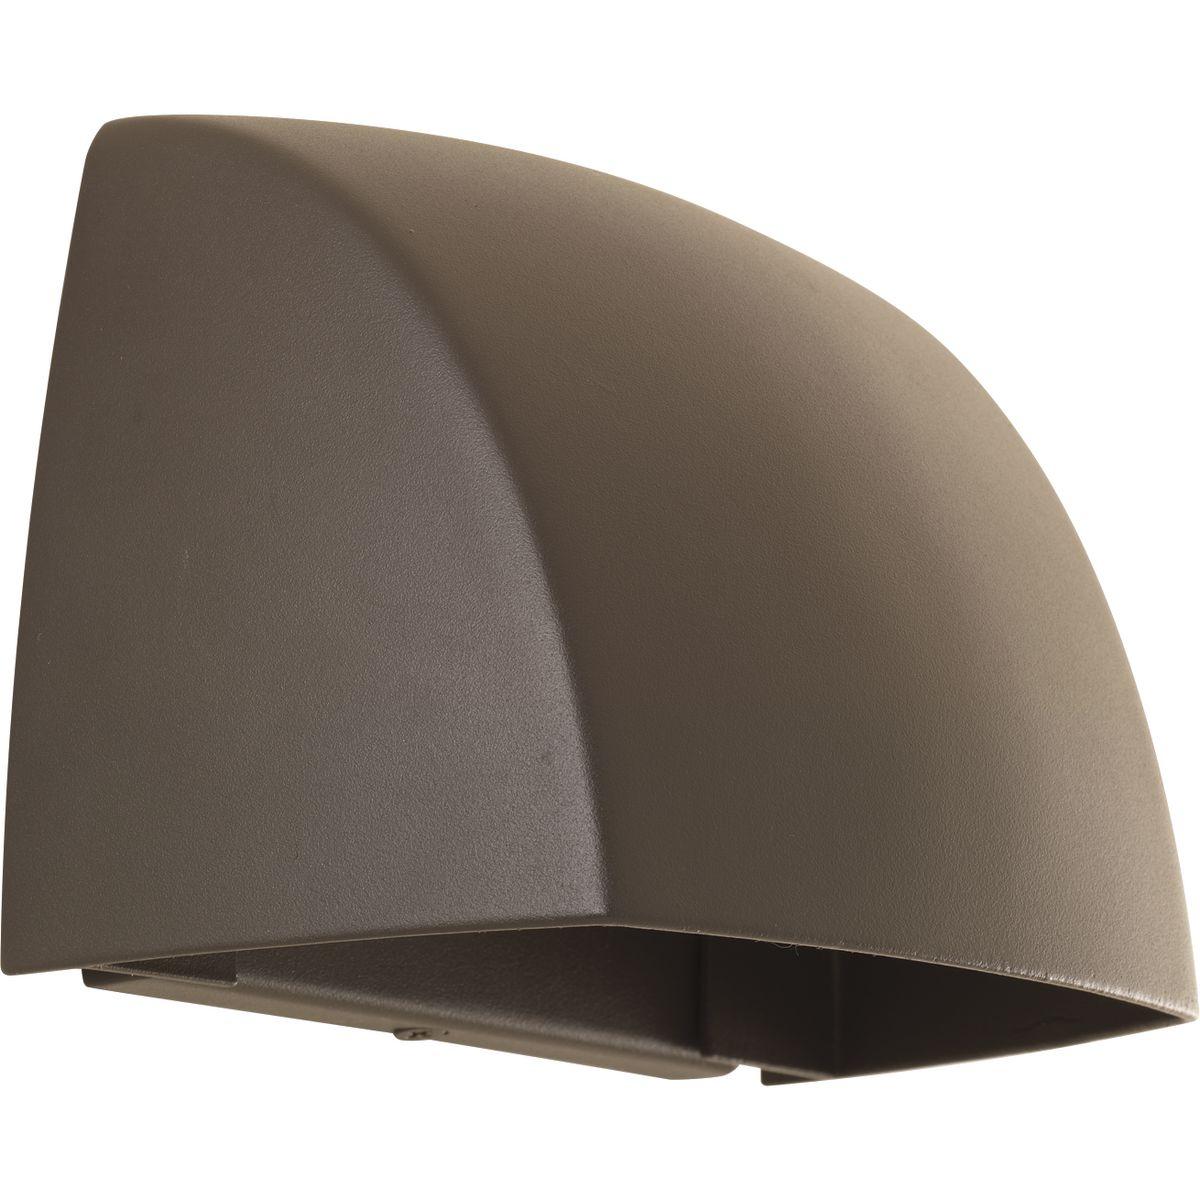 Hubbell P5634-2030K9 Modern geometric outdoor LED sconces are designed to complement a range of residential and commercial architectural styles. ADA compliant. 9w LED is 3000K, 90+ CRI in an Antique Bronze cast aluminum shade. Dark Sky compliant.  ; Modern geometric outdoor L